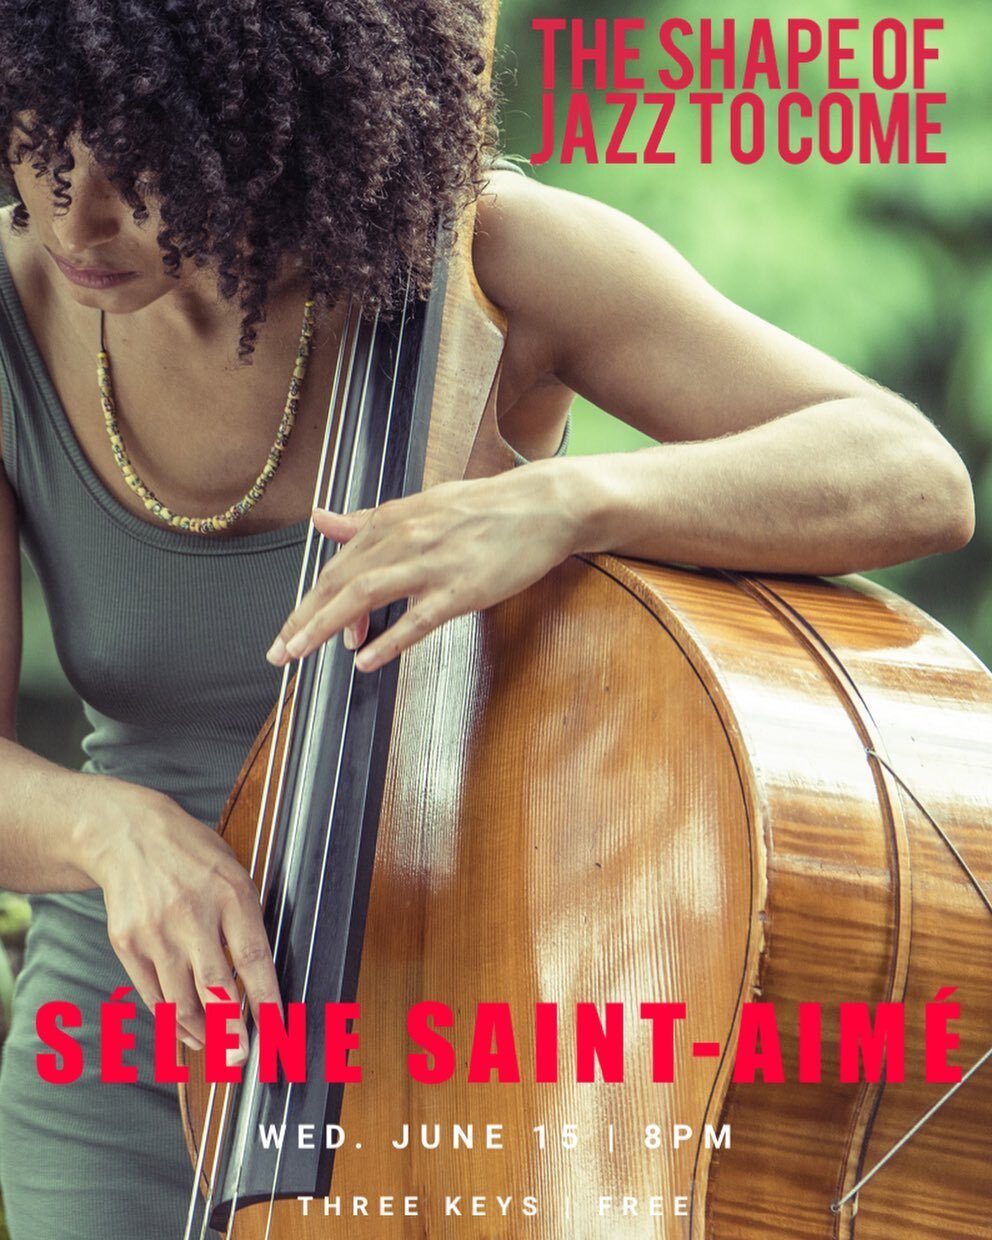 Join us W E D  J U N E 15 for this exceptional quartet performance.
S&eacute;l&egrave;ne is a afro-french contrabassist, singer and composer with caribbean and west african origins. Her unique gift is mesmerizing.
Do👏🏼Not 👏🏼Miss 👏🏼This👏🏼 Show